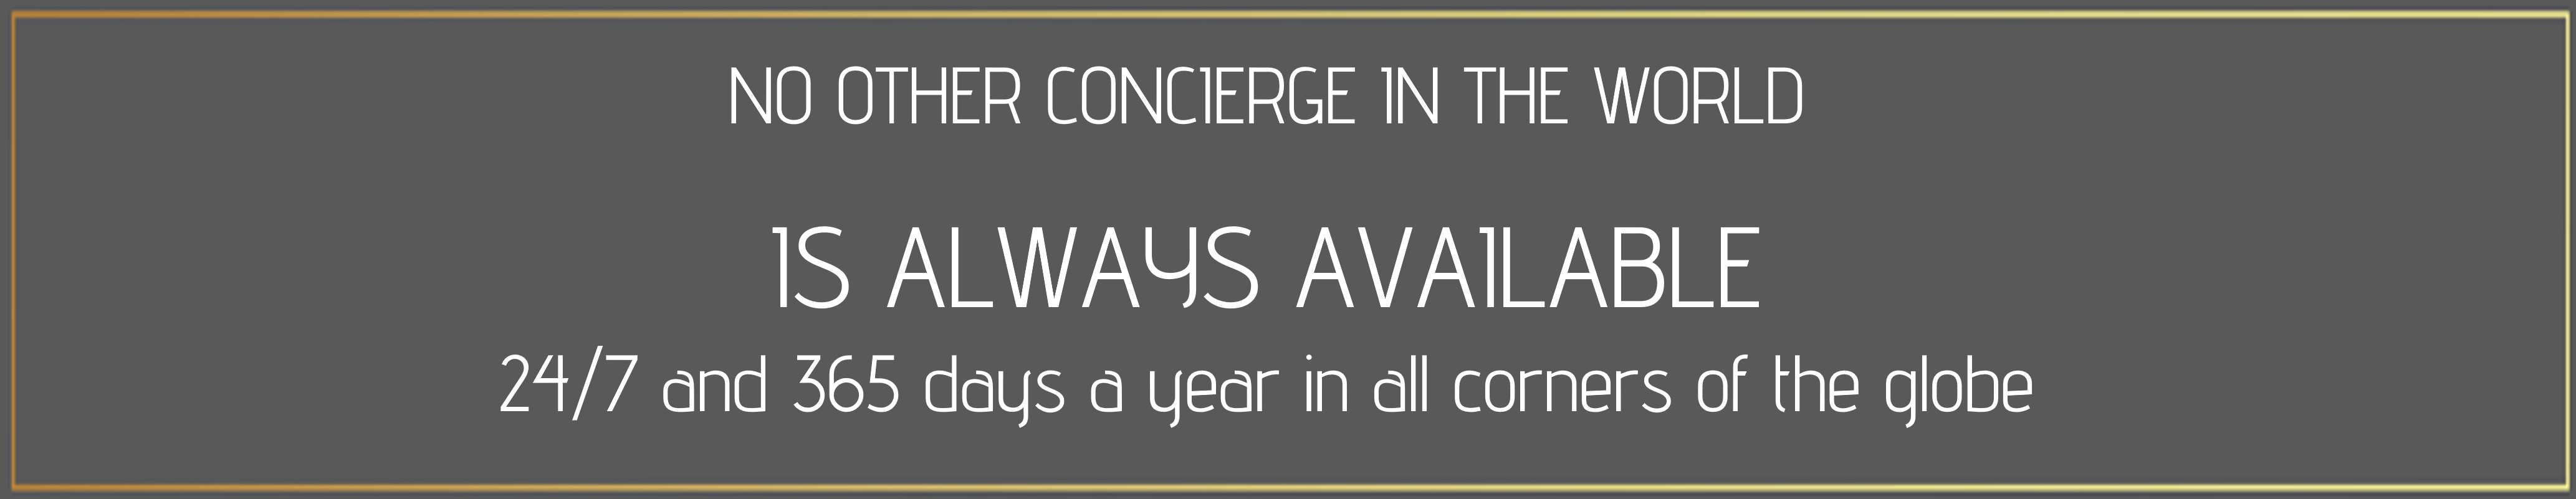 sincura concierge is available 24/7 365 days a year in every country